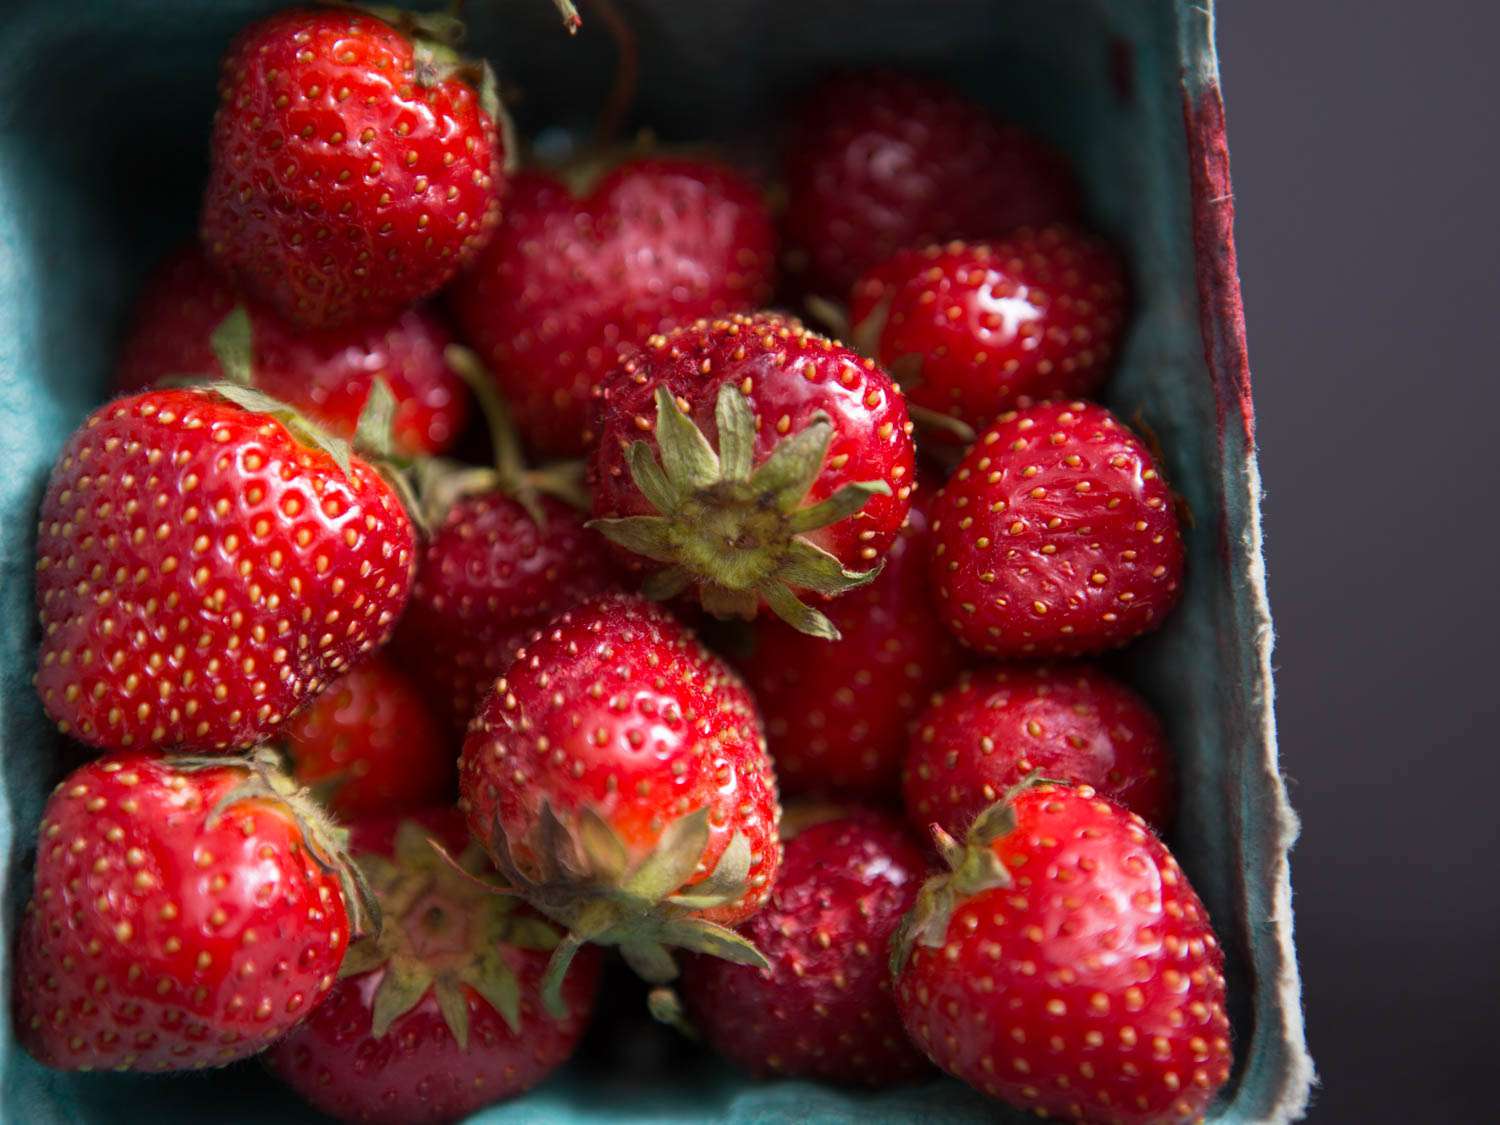 Fresh strawberries in a container.